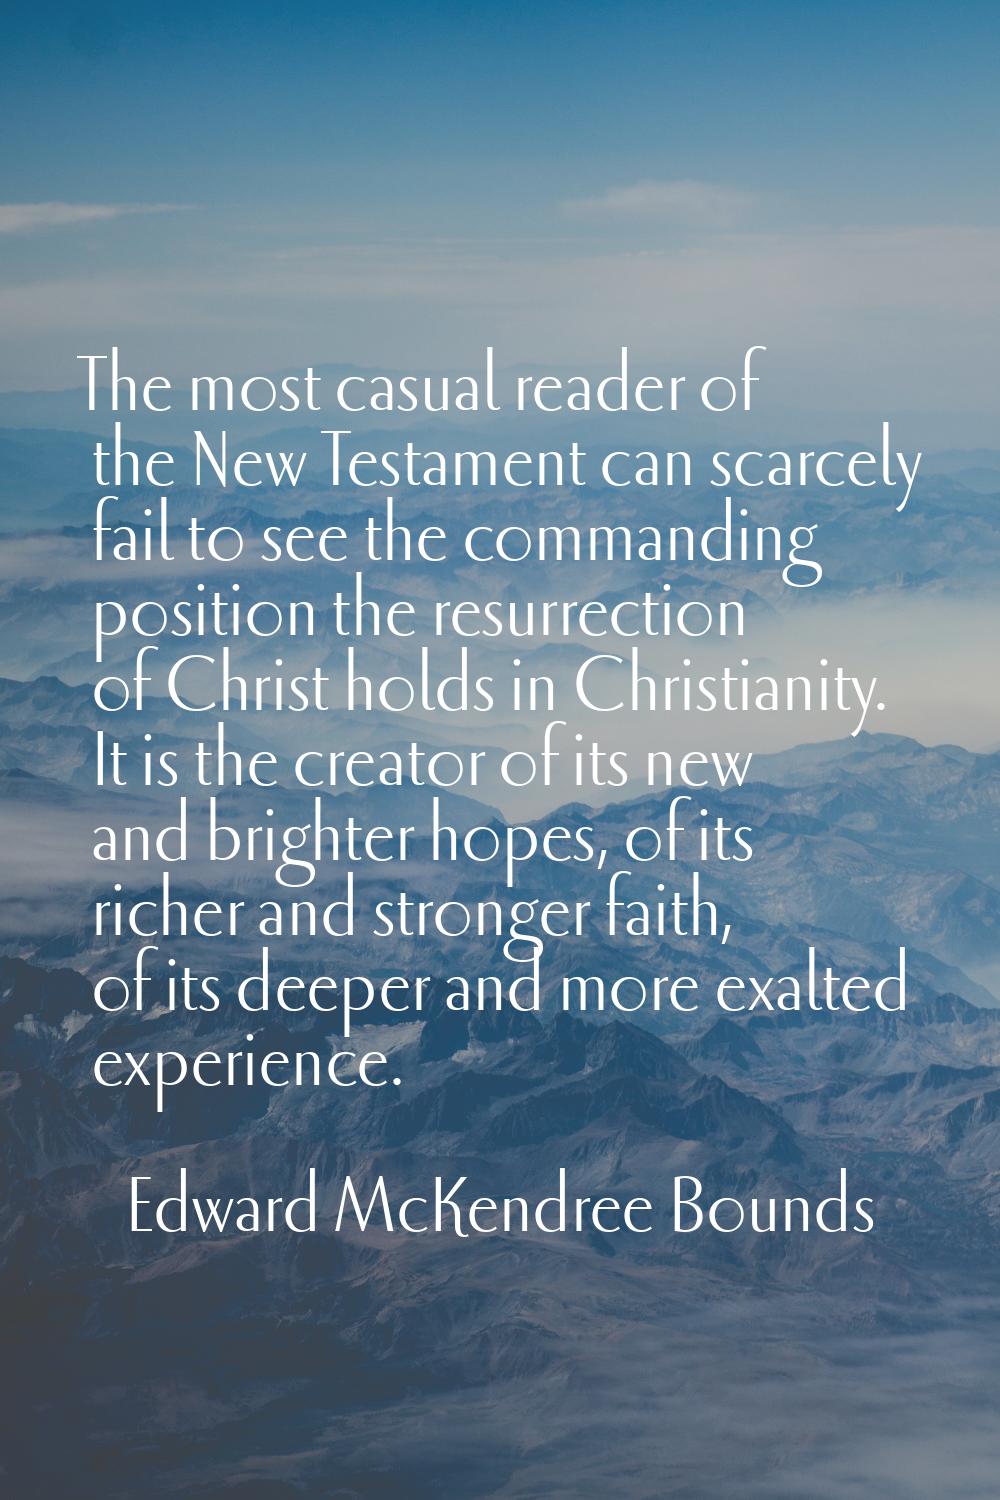 The most casual reader of the New Testament can scarcely fail to see the commanding position the re